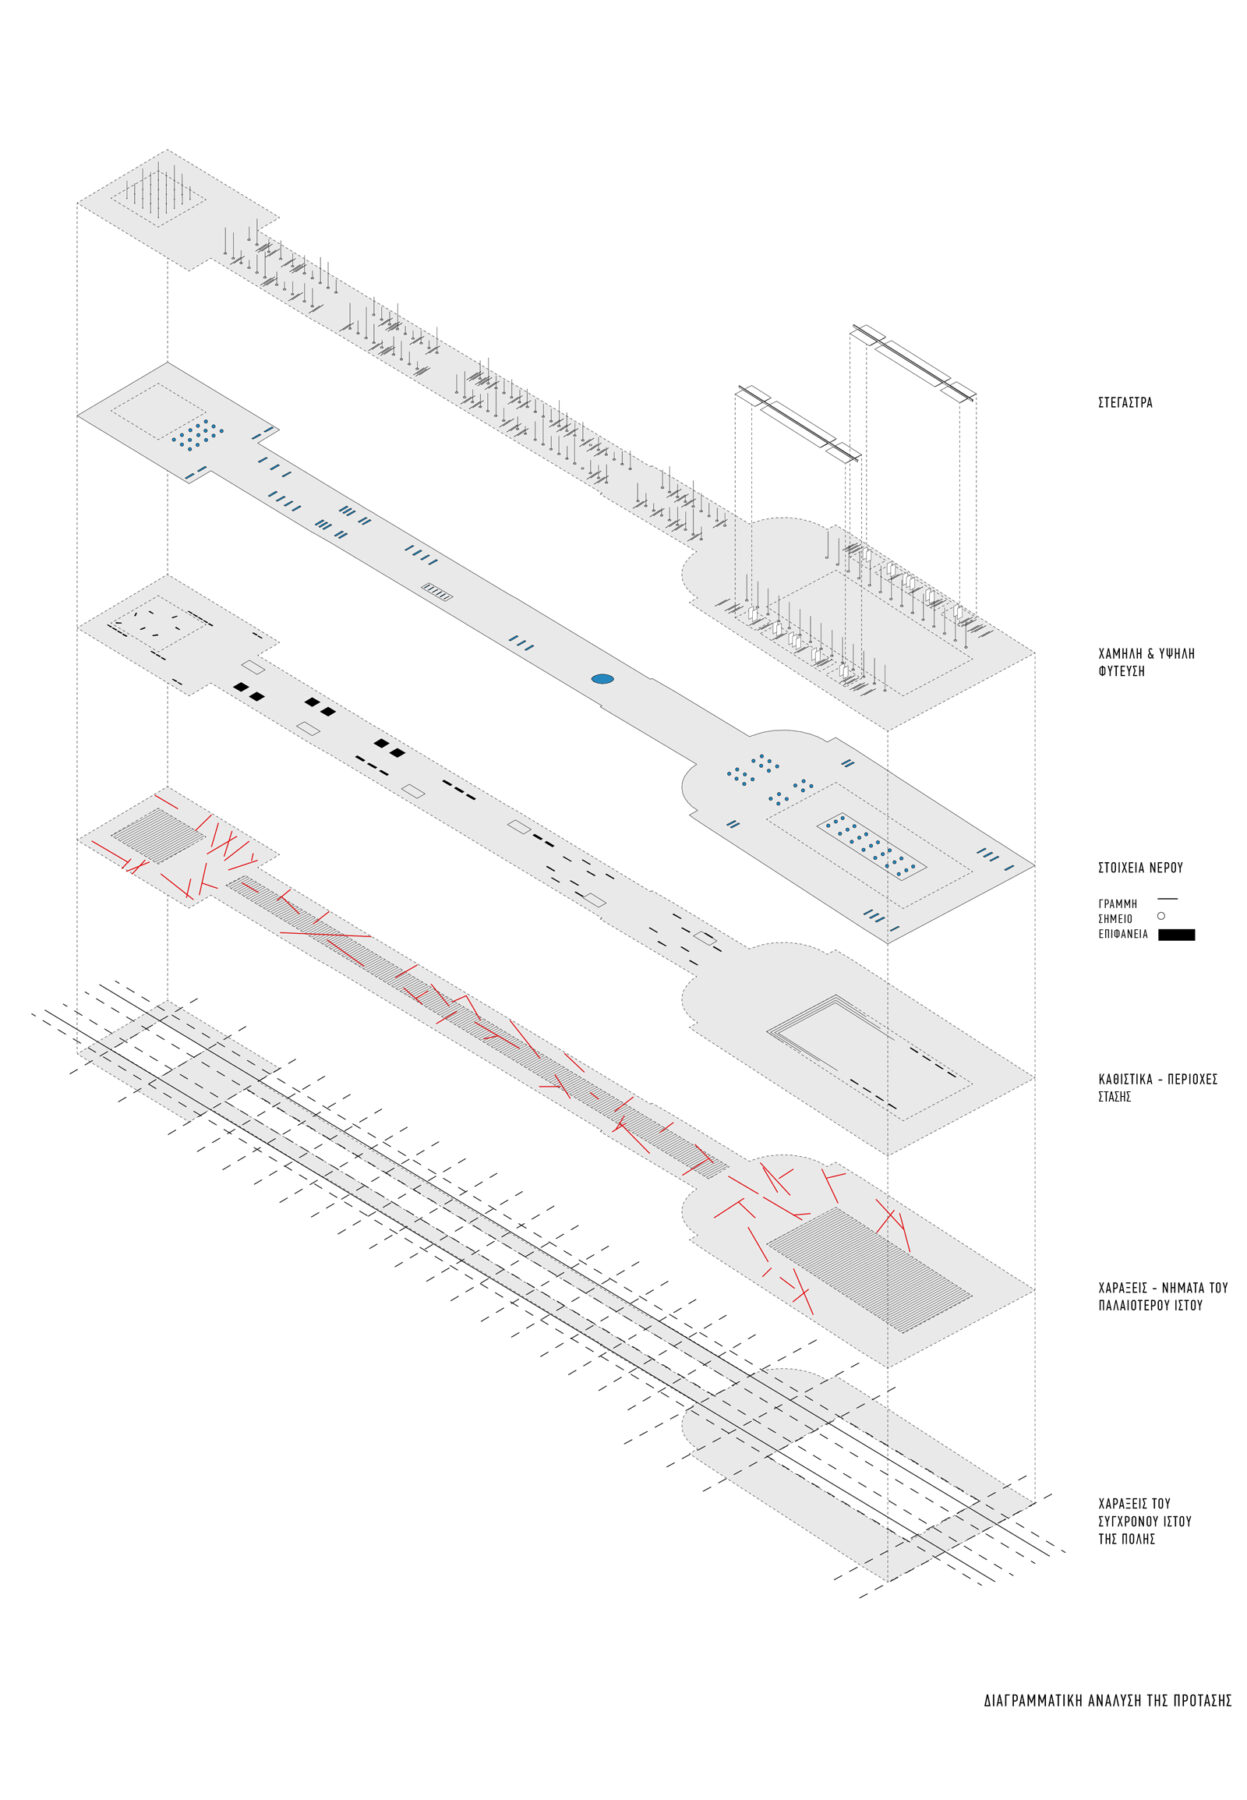 Archisearch MEMORY THREADS: architects A. Vozani and E. Fanou in collaboration with D. Panagiotopoulou, G. Voutoufianakis-Petropoulos & architecture student G. Retsos win 1st prize at the open architectural competition 